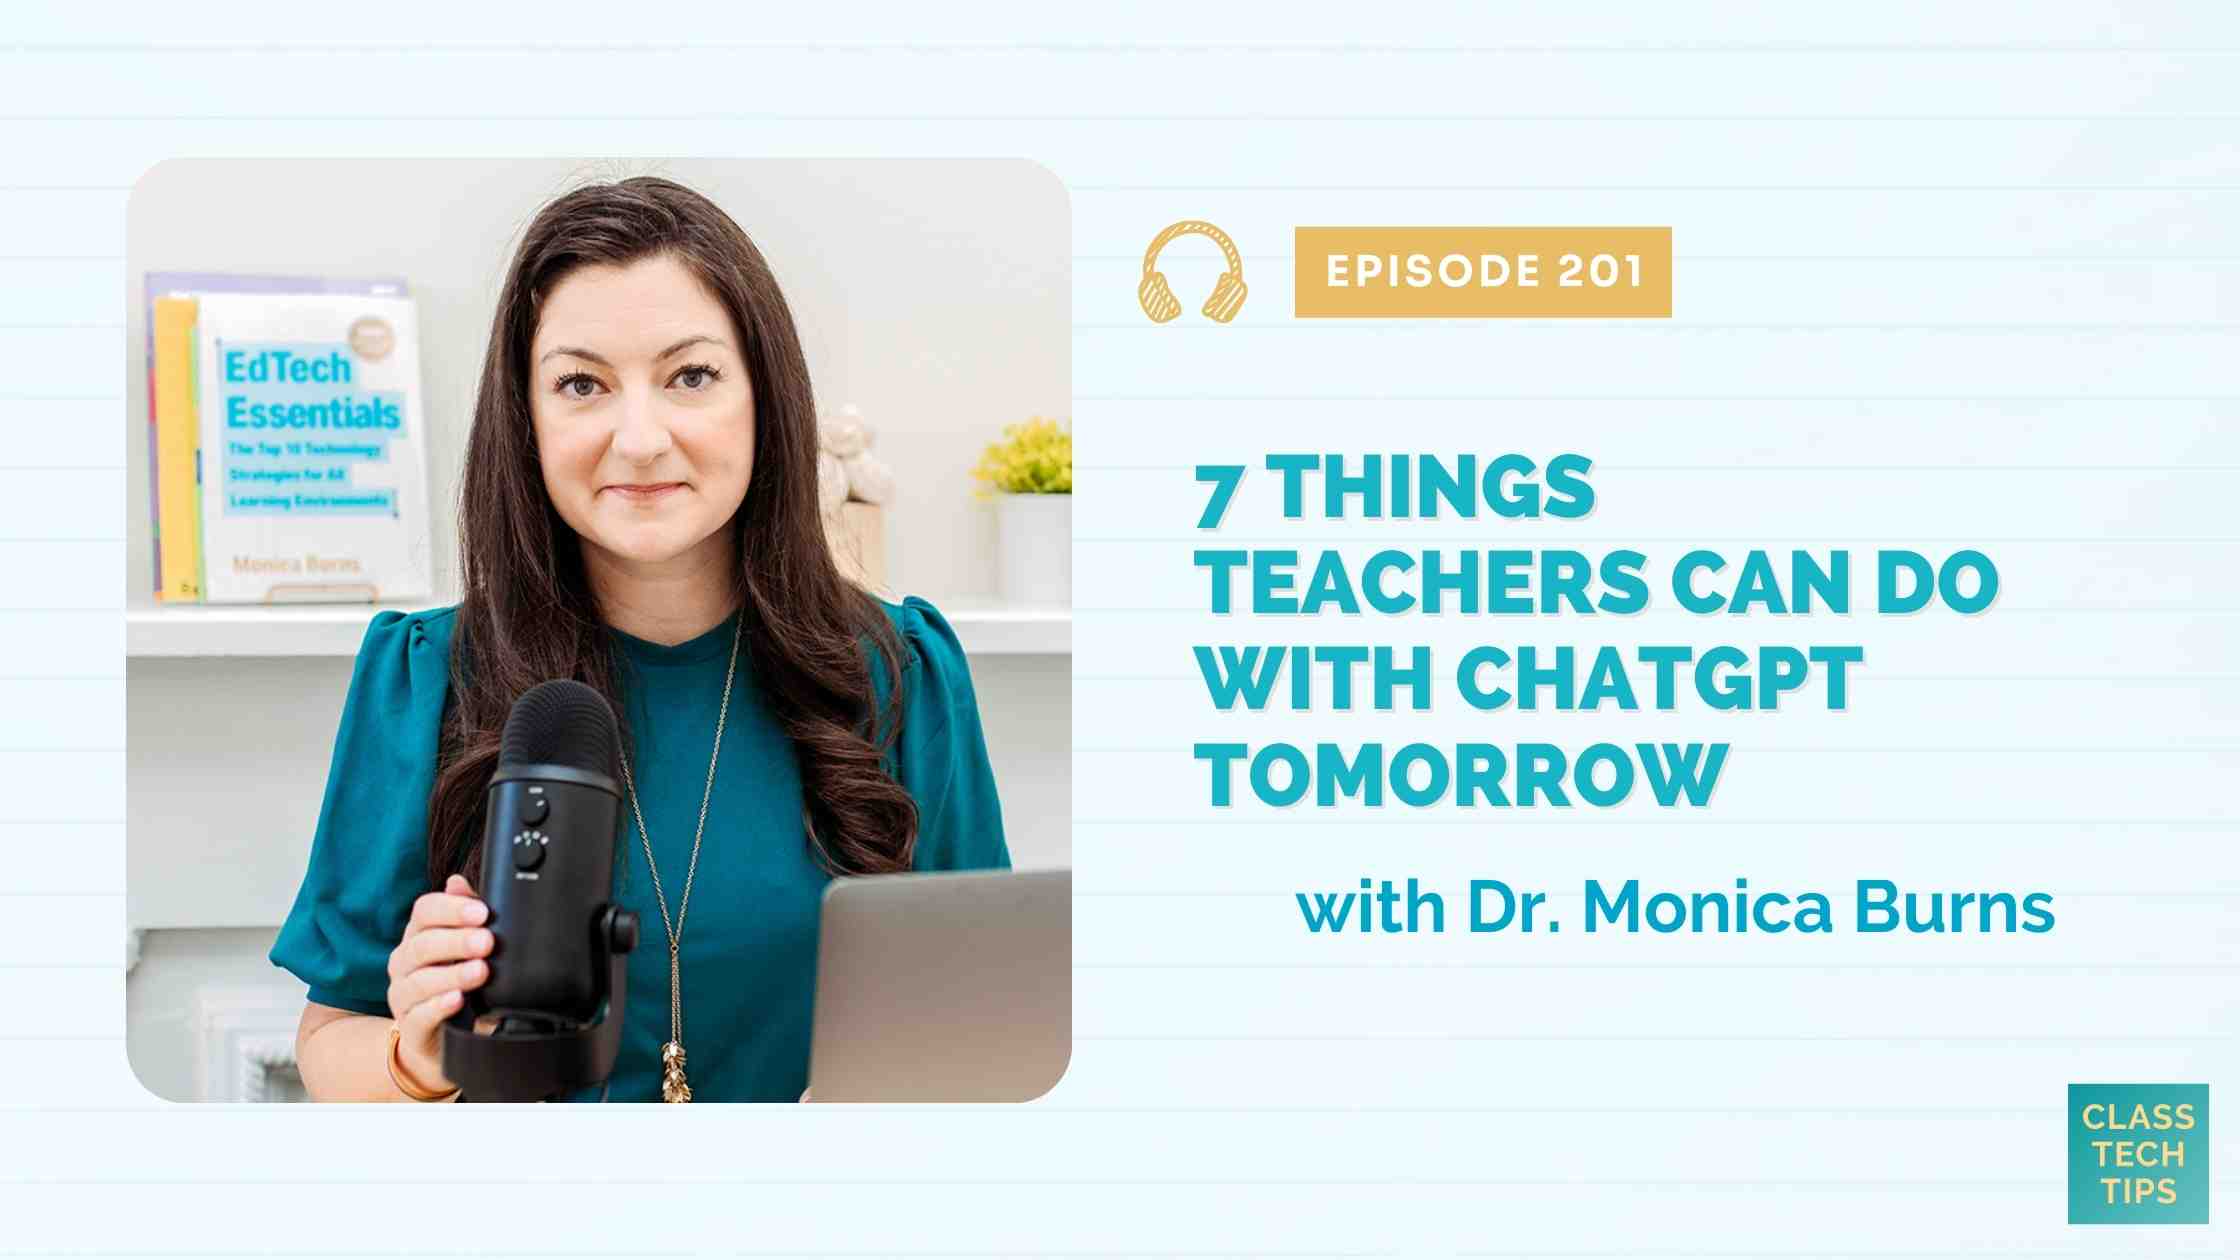 7 Things Teachers Can Do With ChatGPT Tomorrow - Easy EdTech Podcast 201 - Class Tech Tips